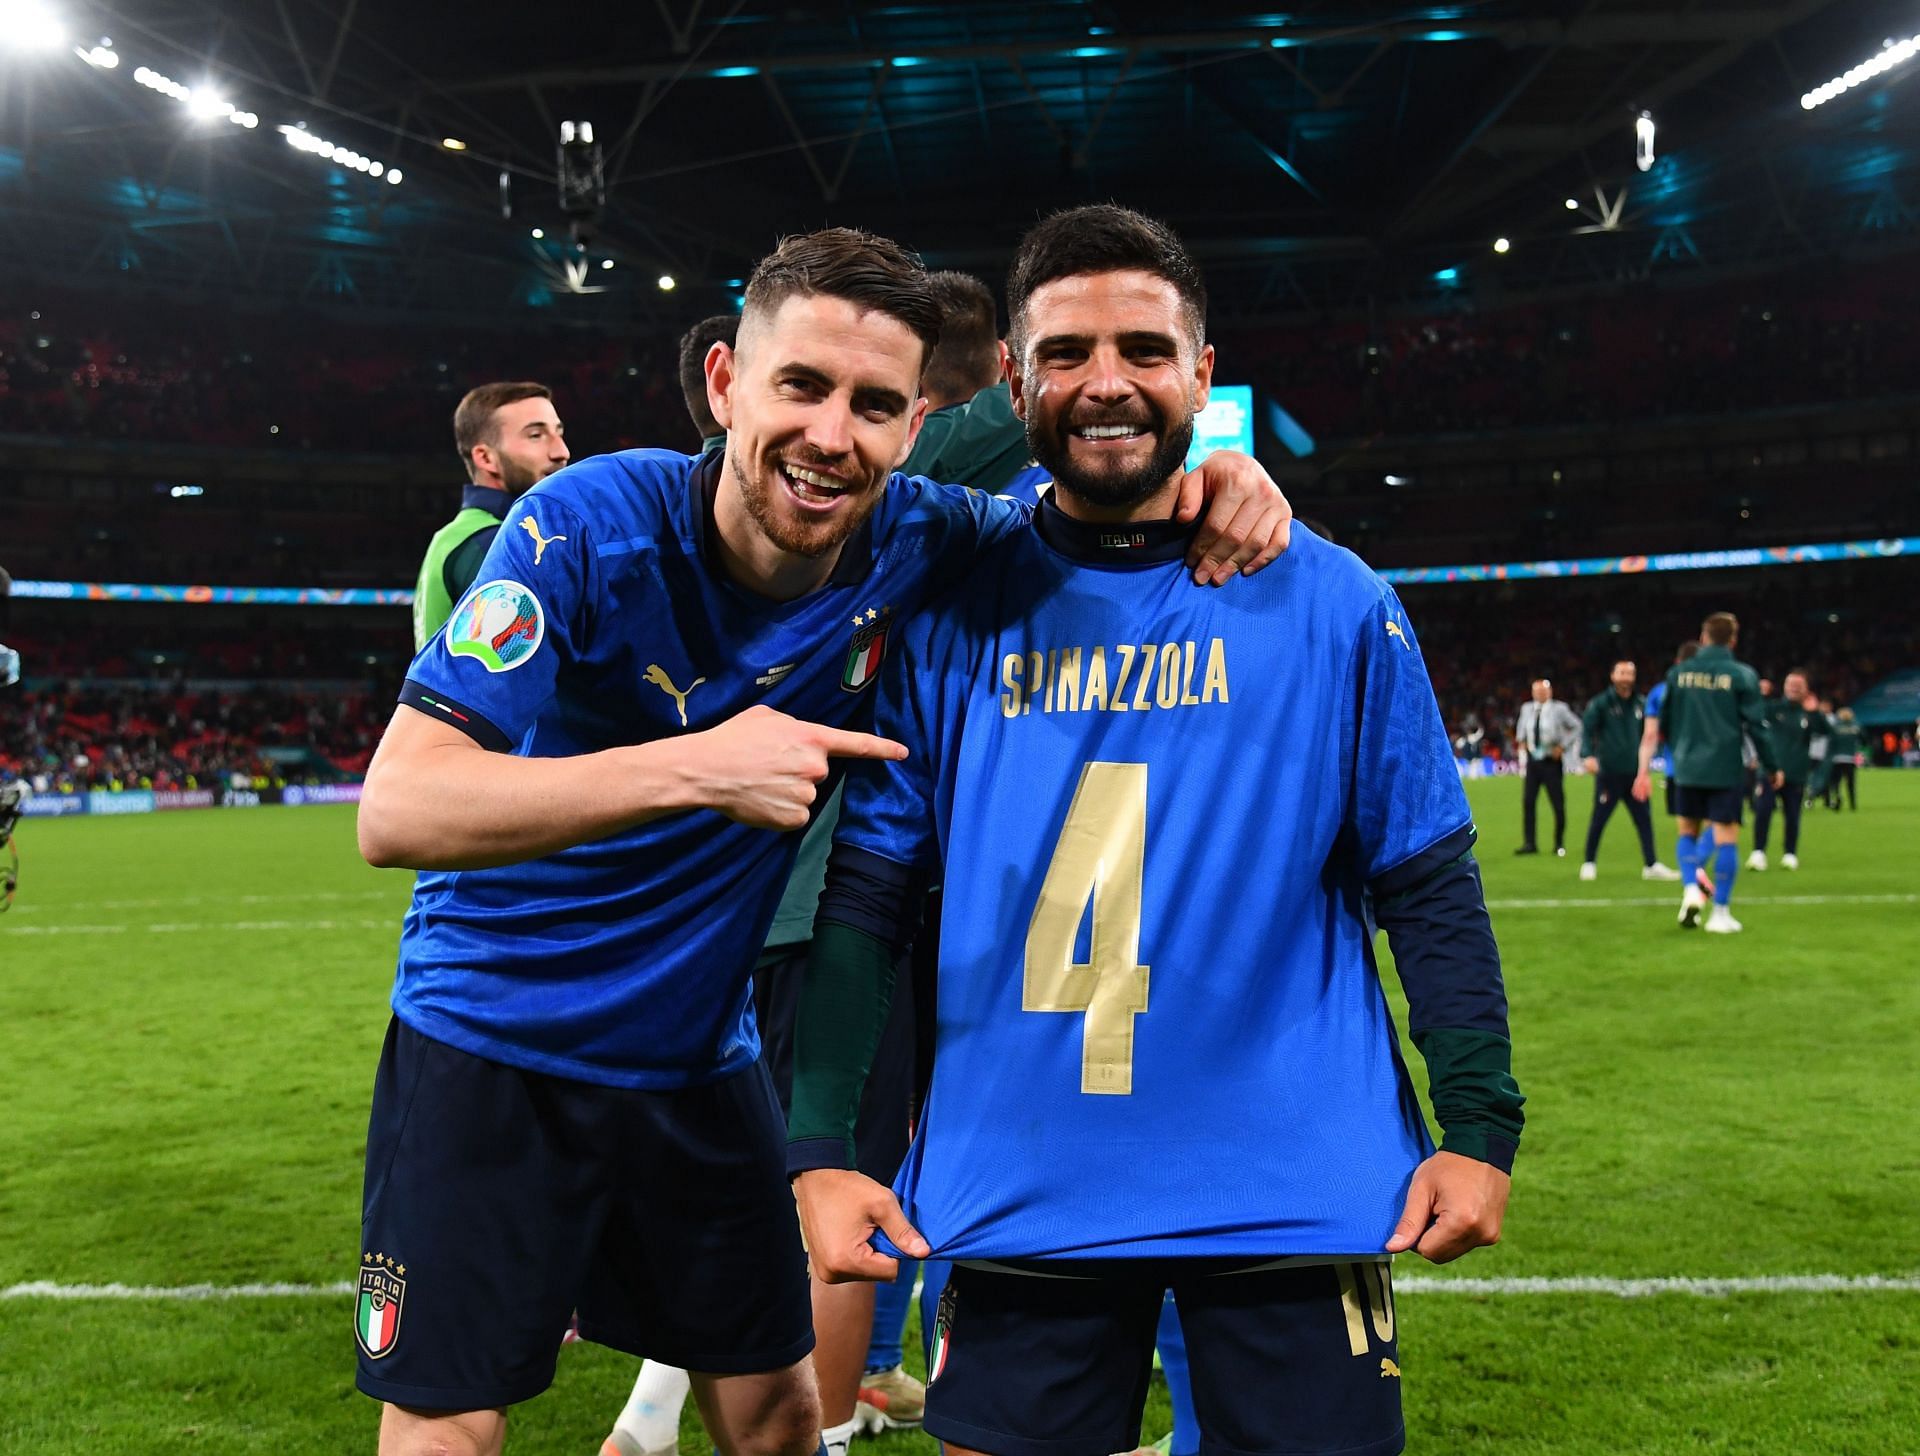 Jorginho (L) and Lorenzo Insigne (R) were some of the best Italian players in world football this year